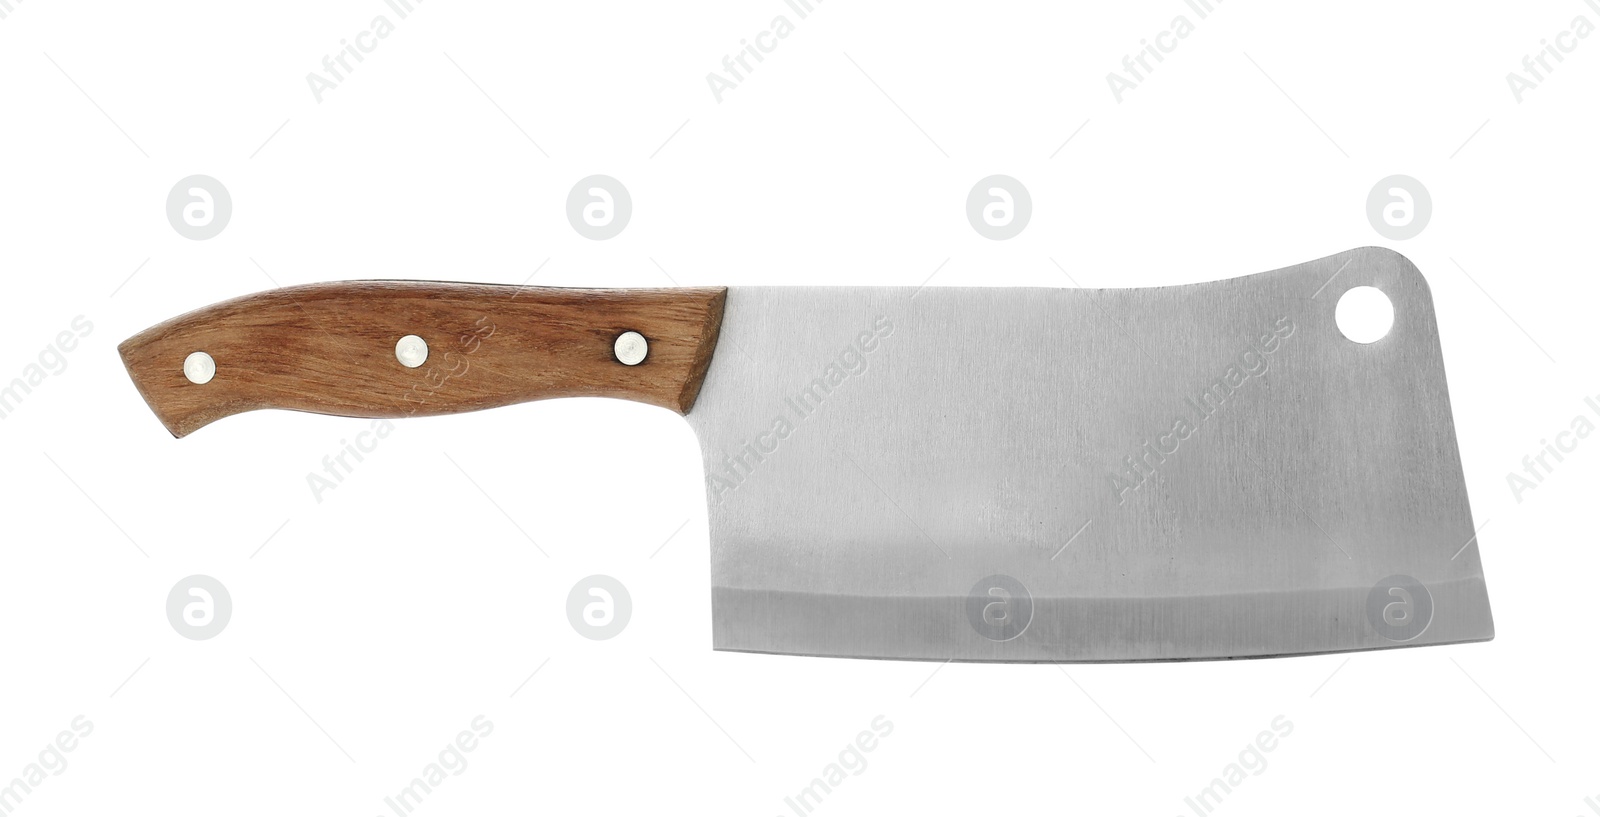 Photo of Large sharp cleaver knife with wooden handle isolated on white